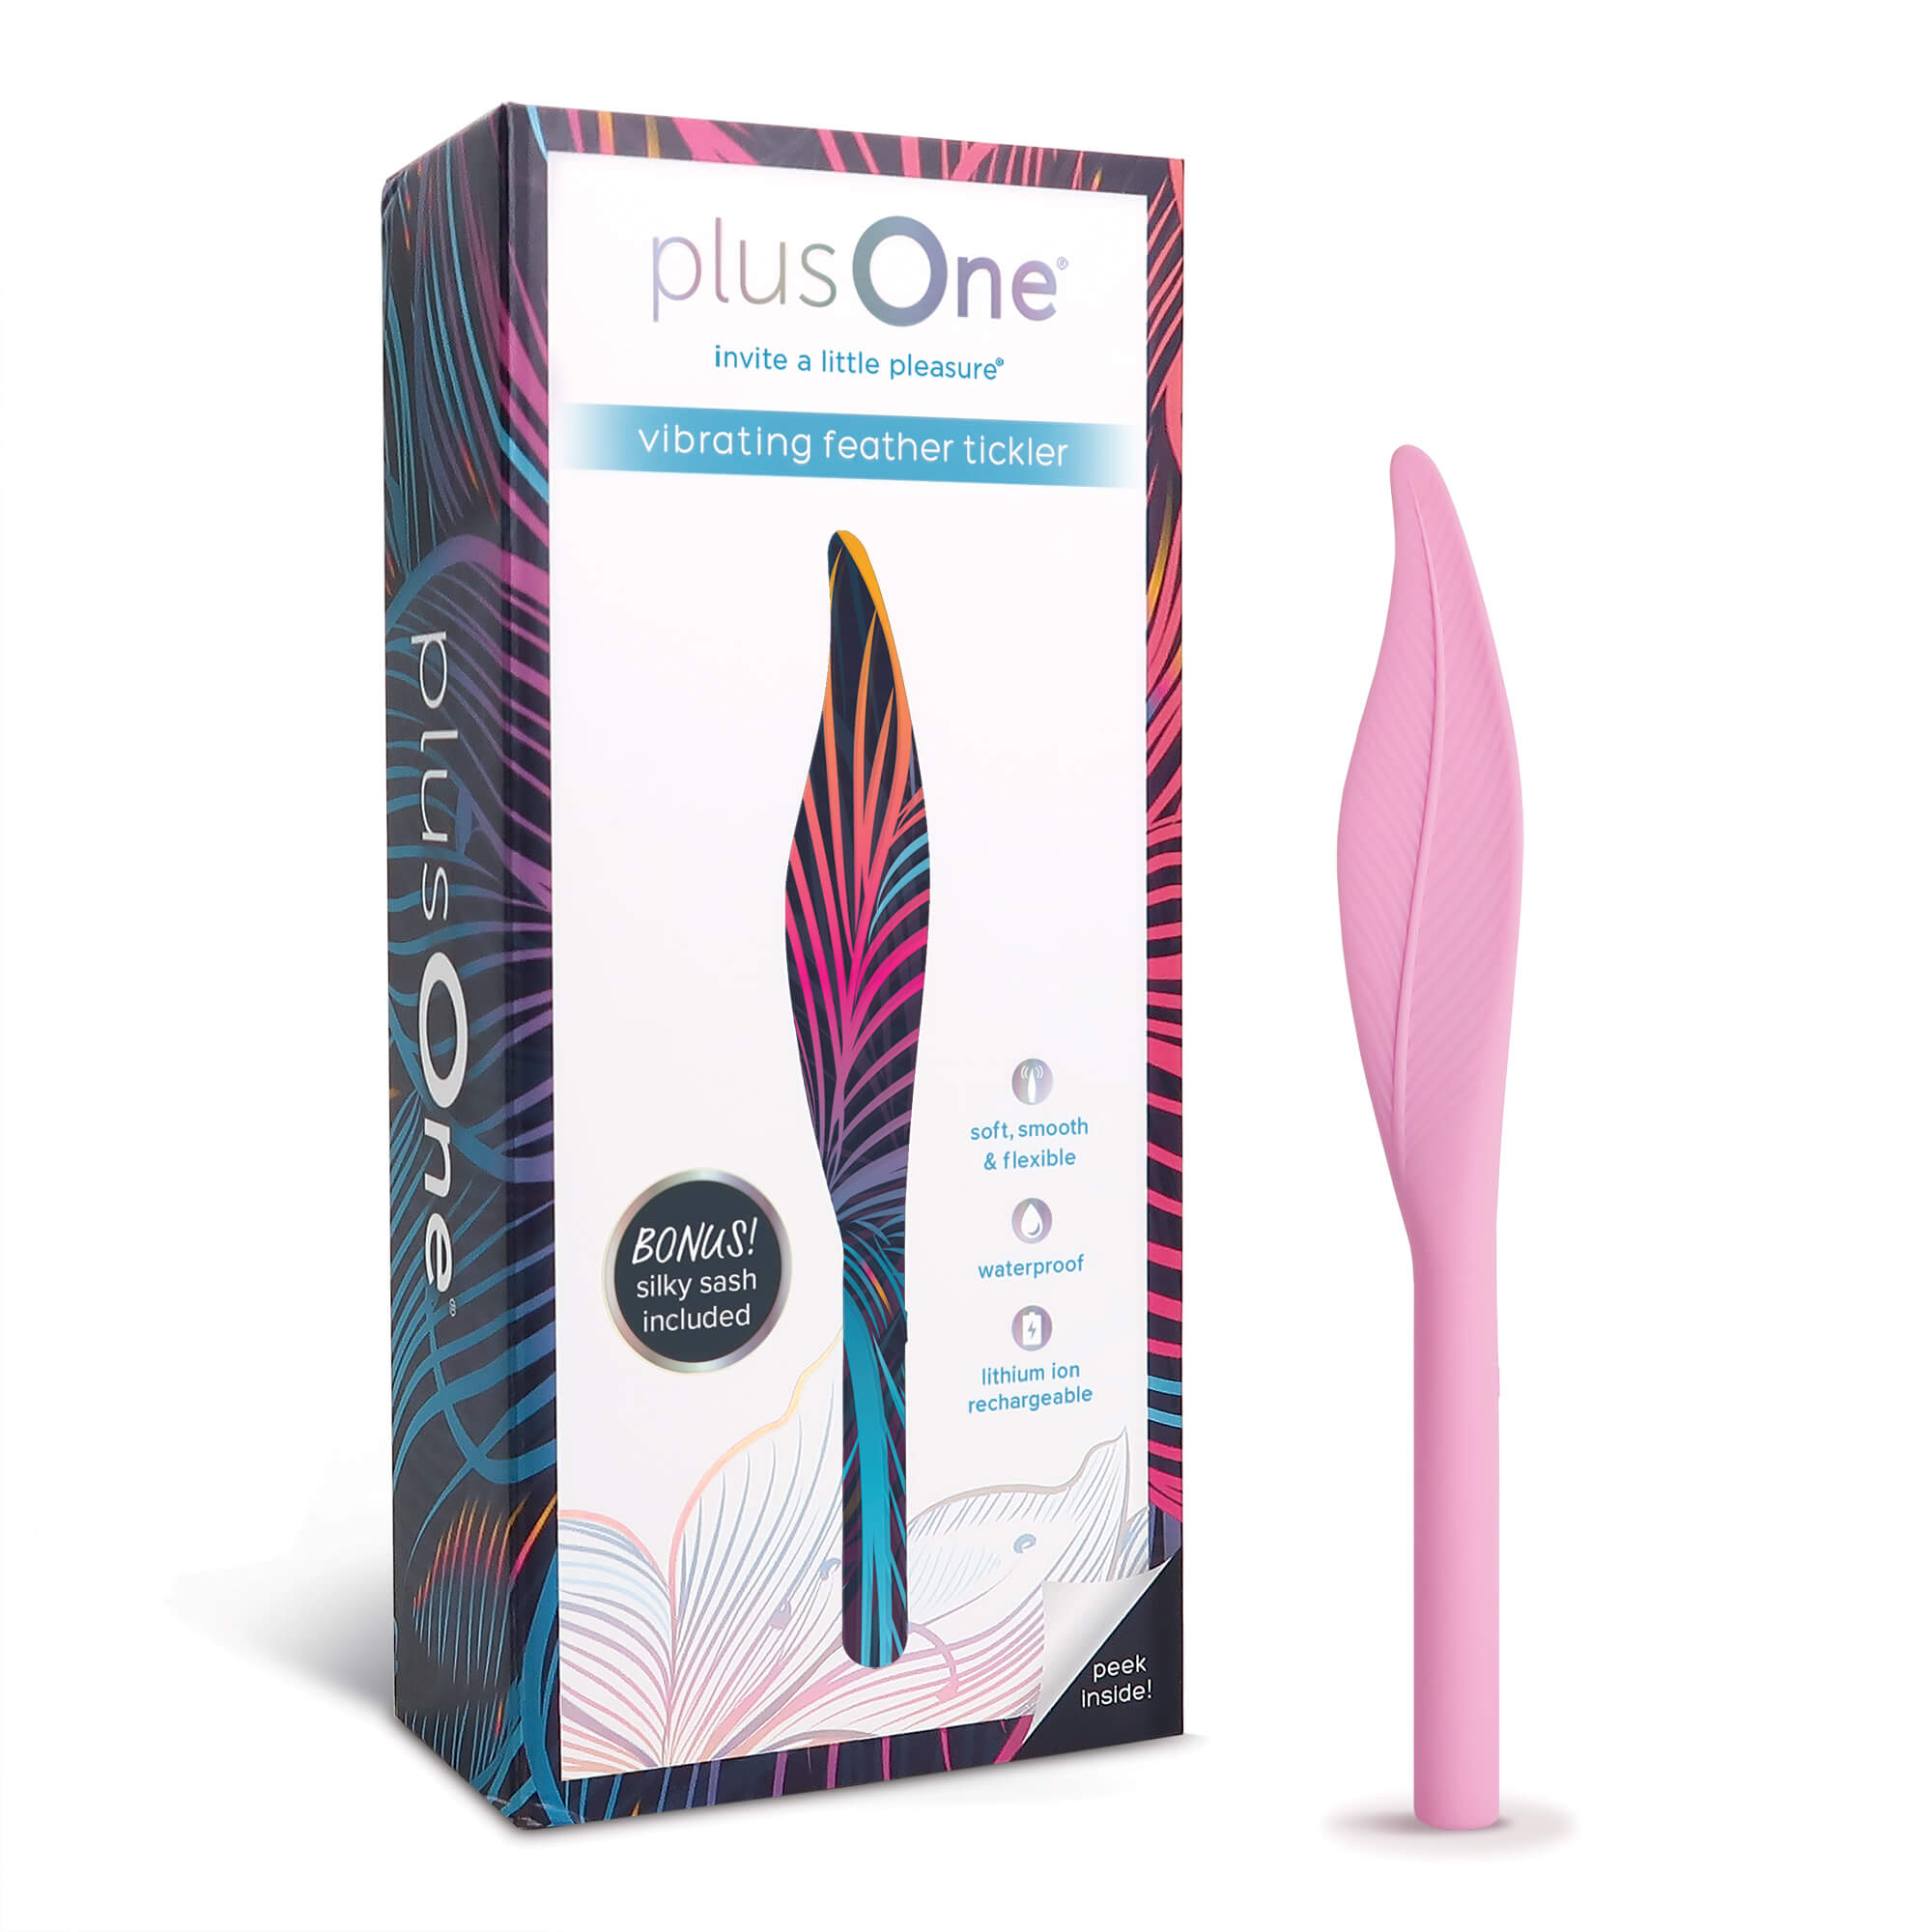 plusOne vibrating feather tickler next to packaging